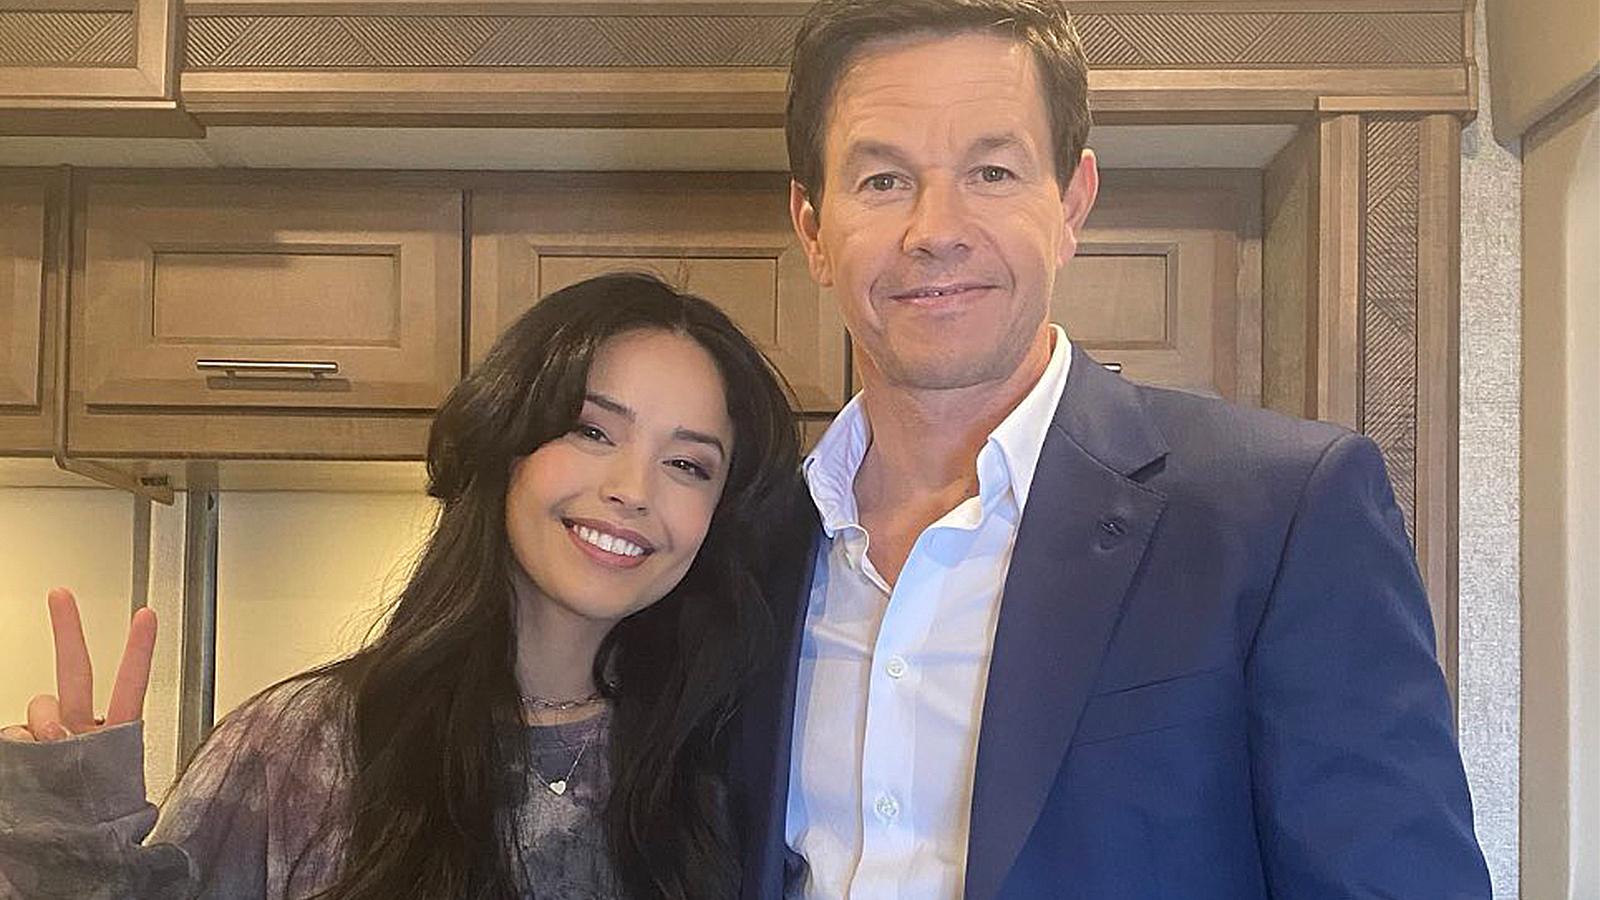 Valkyrae to star in movie with mark wahlberg the family plan